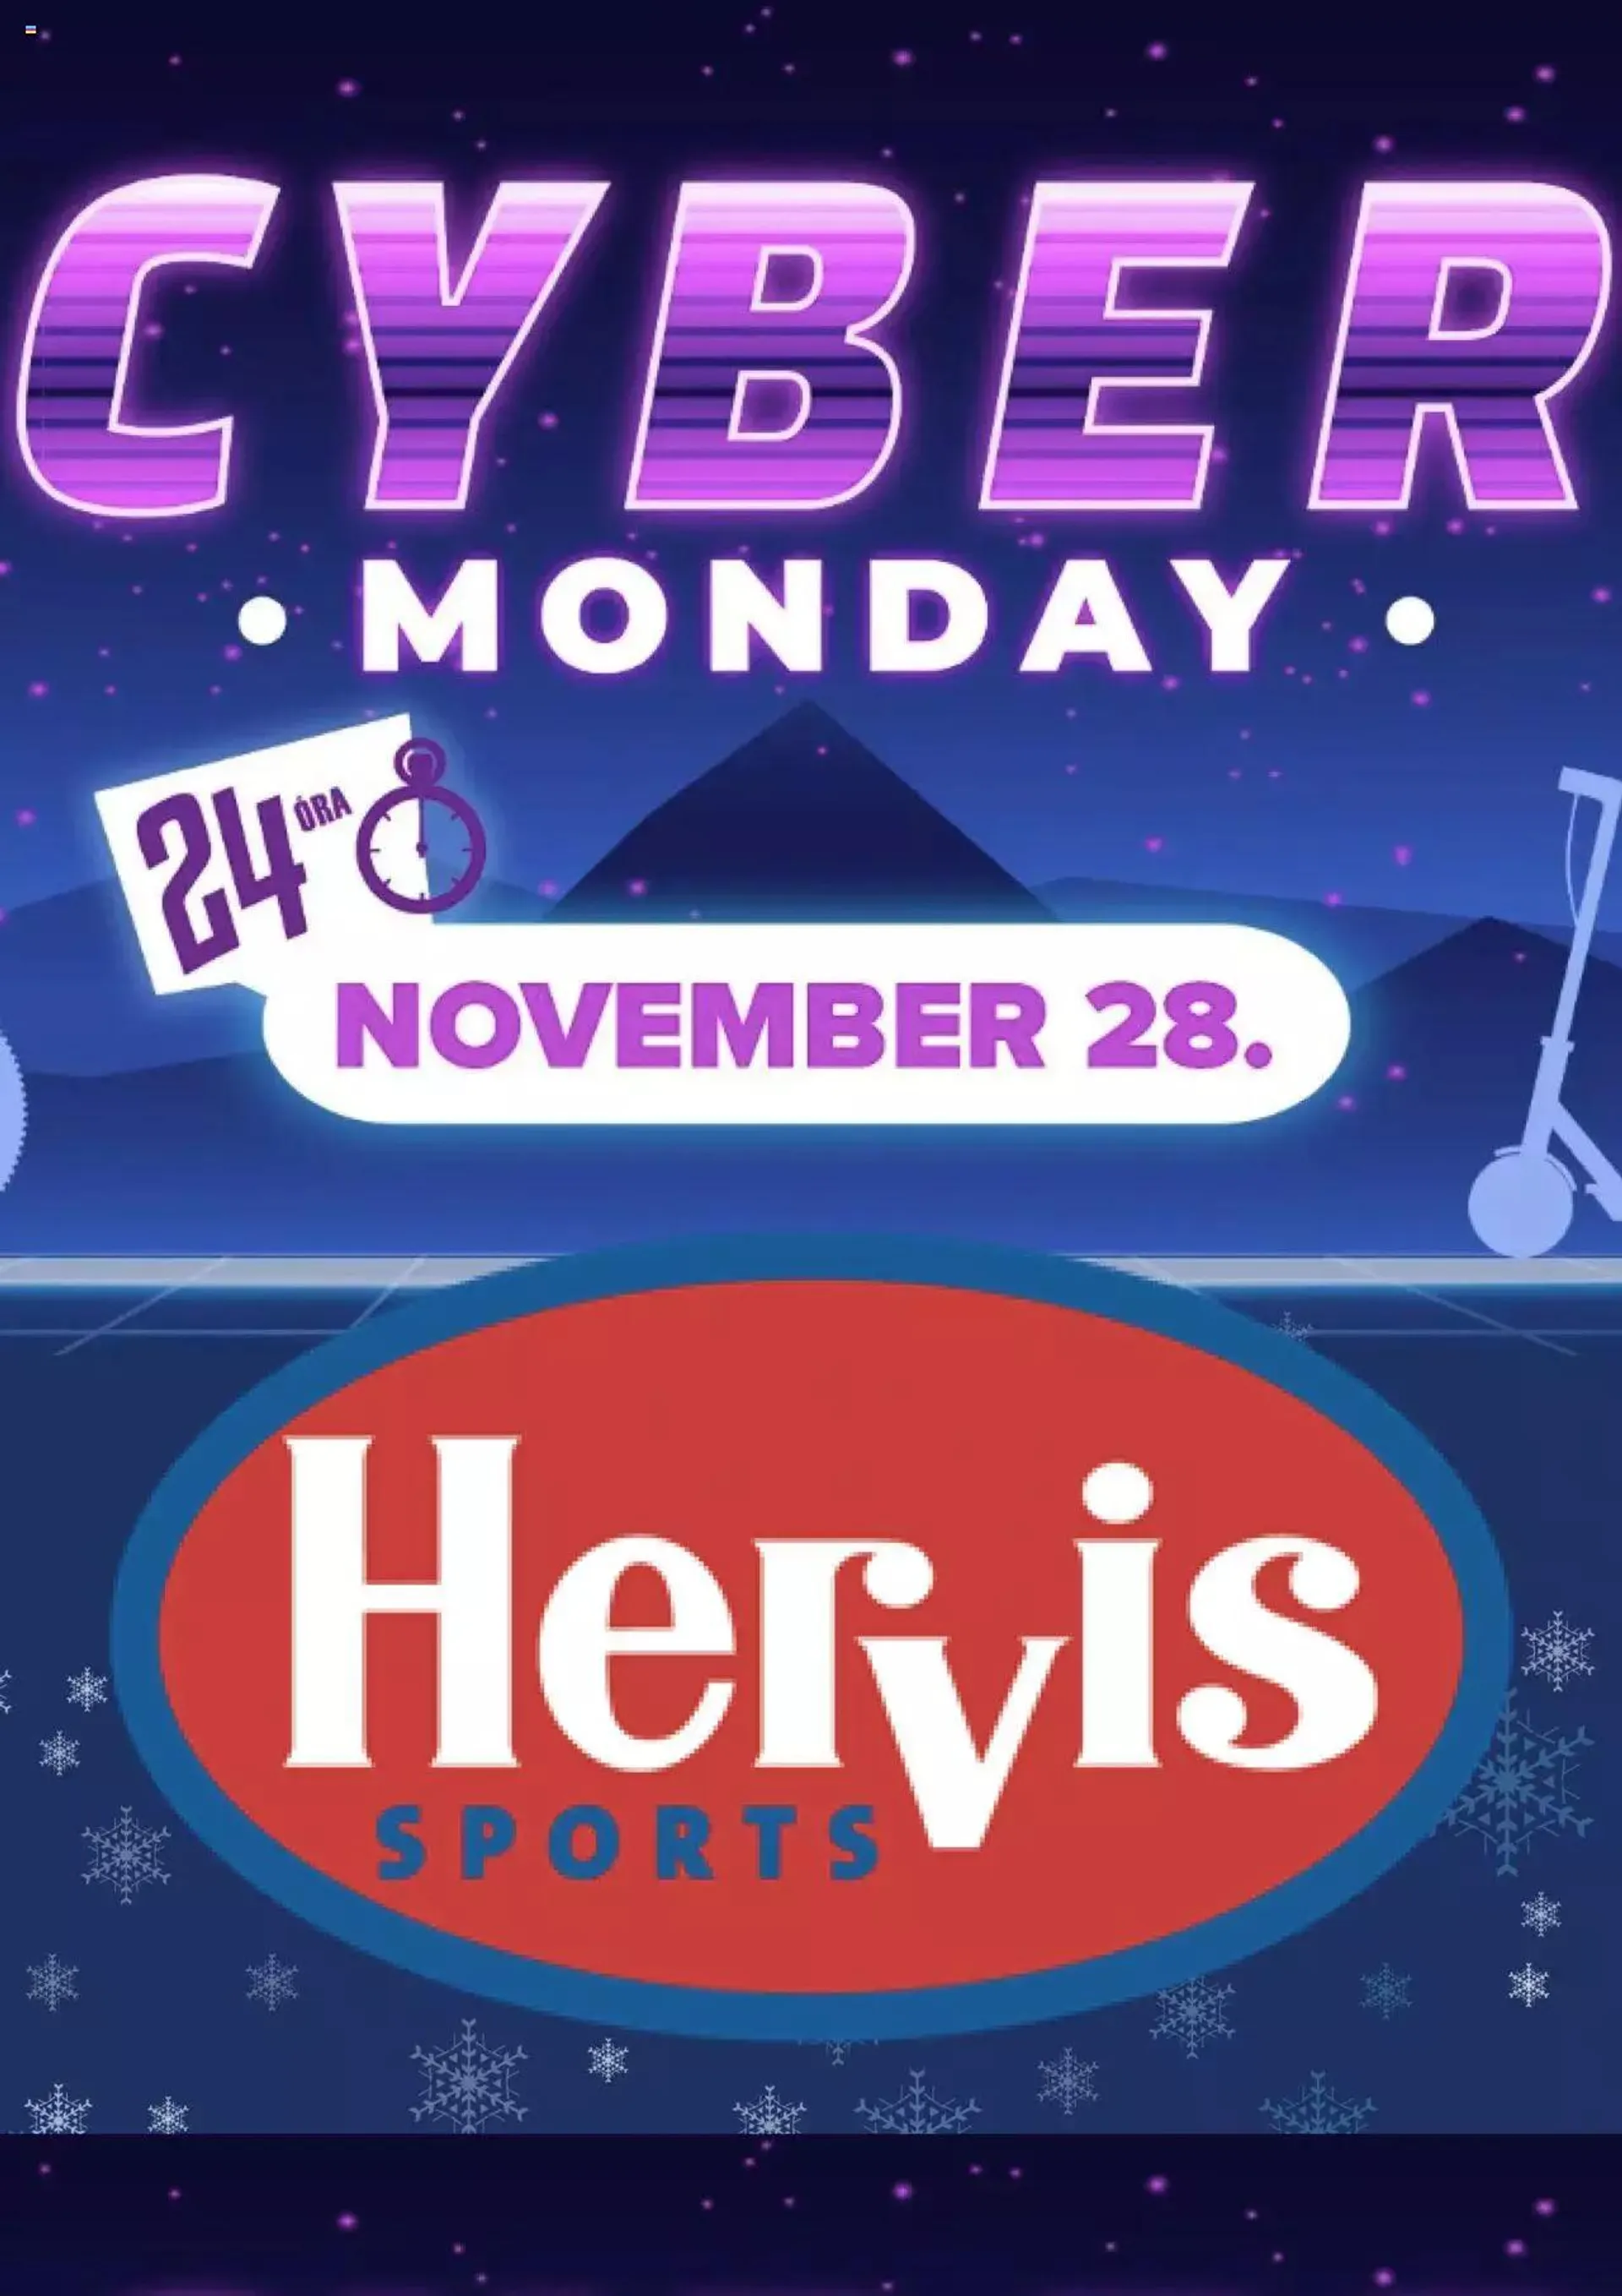 Hervis Sports - Cyber monday - 0